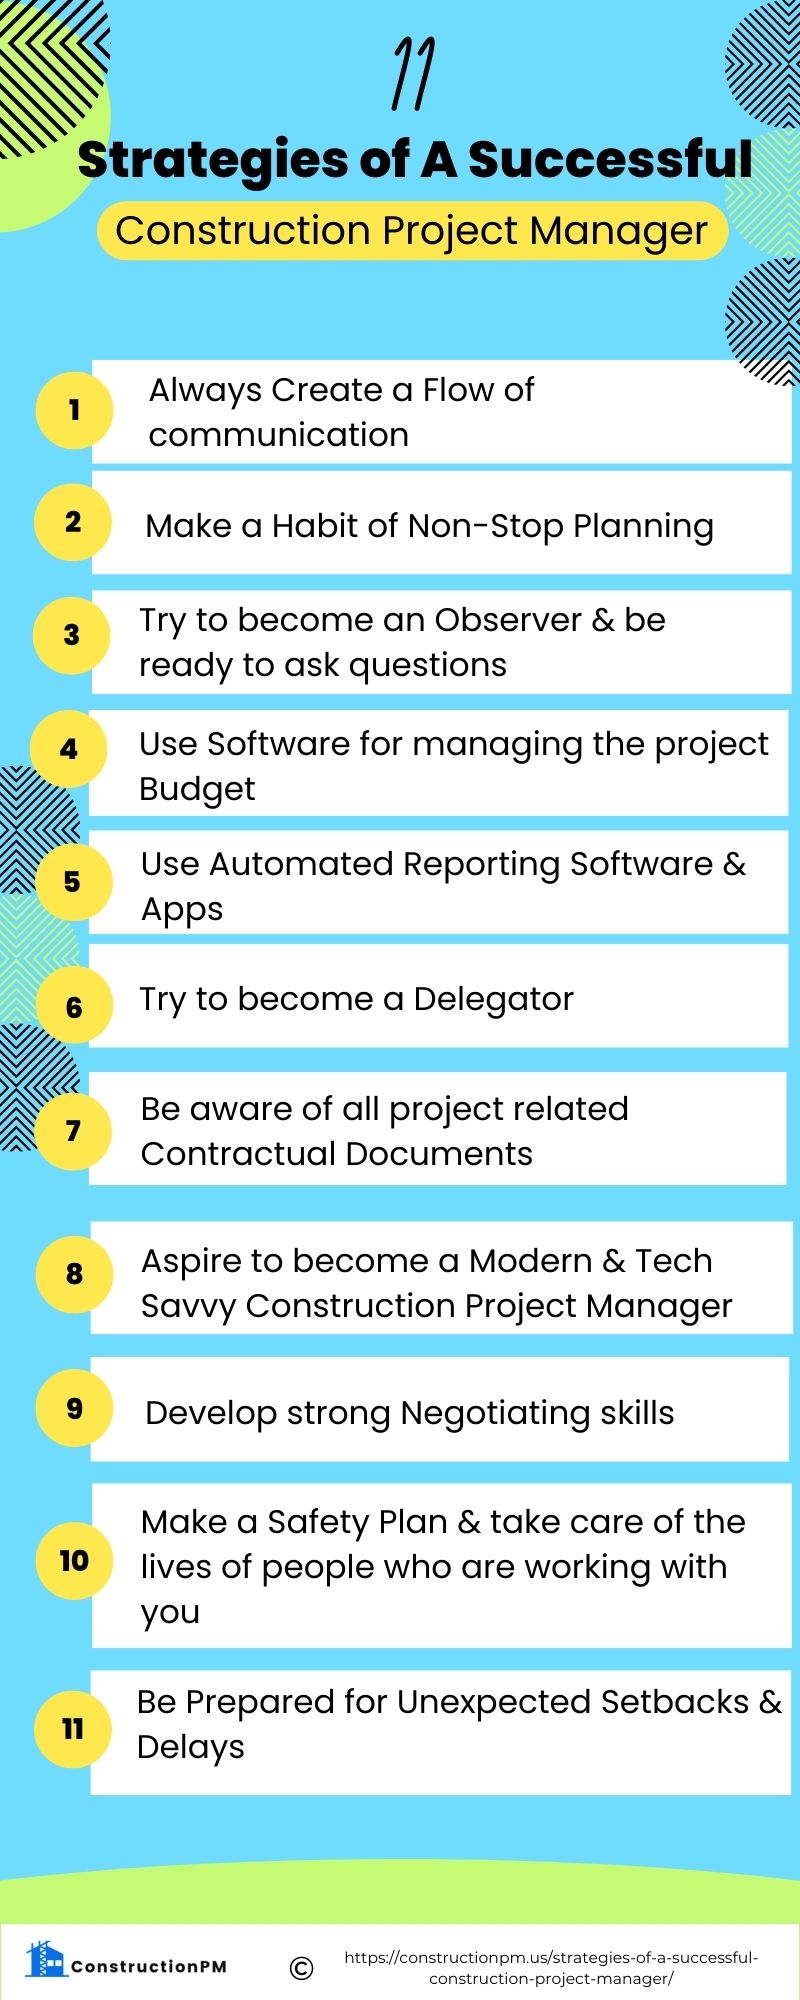 11 Strategies of A Successful Construction Project Manager